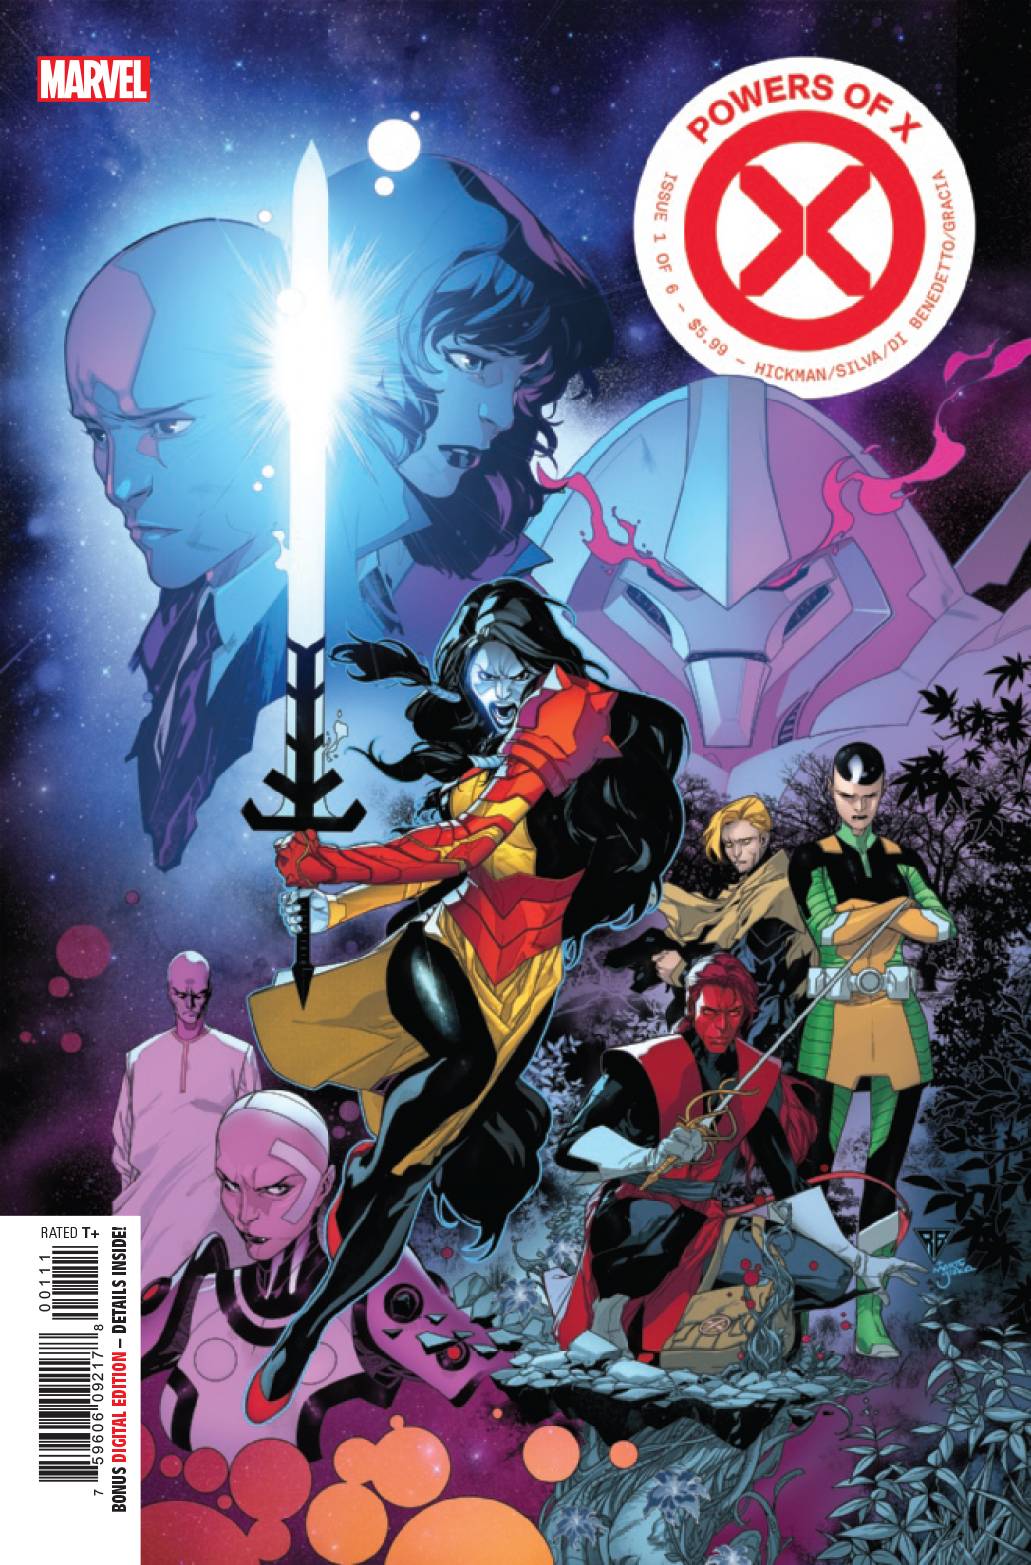 POWERS OF X #1 (OF 6)